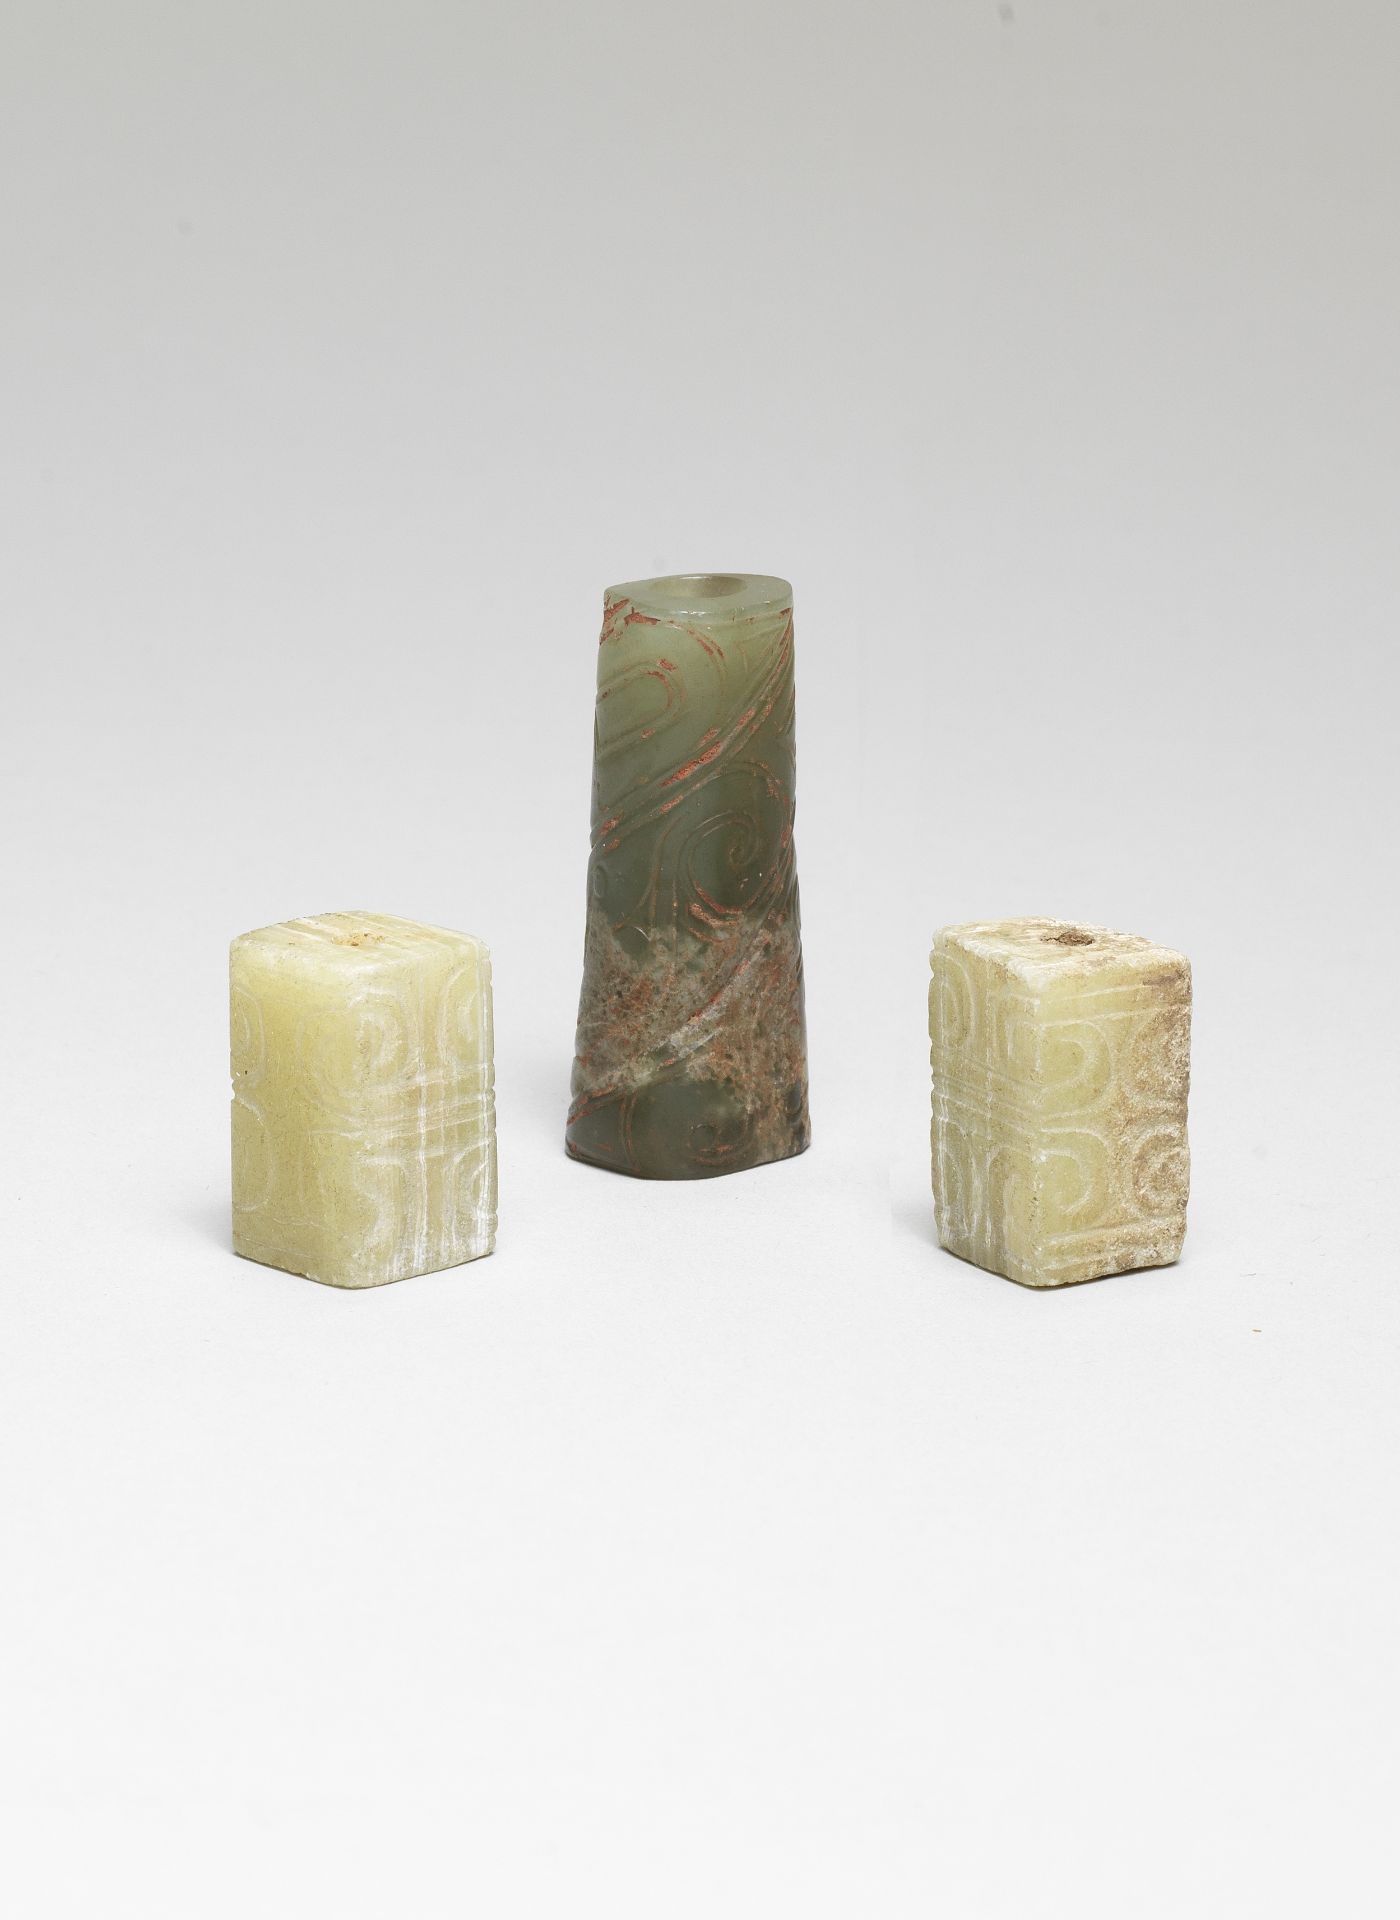 AN ARCHAIC JADE BEAD AND TWO HARDSTONE BEADS Zhou Dynasty (5)